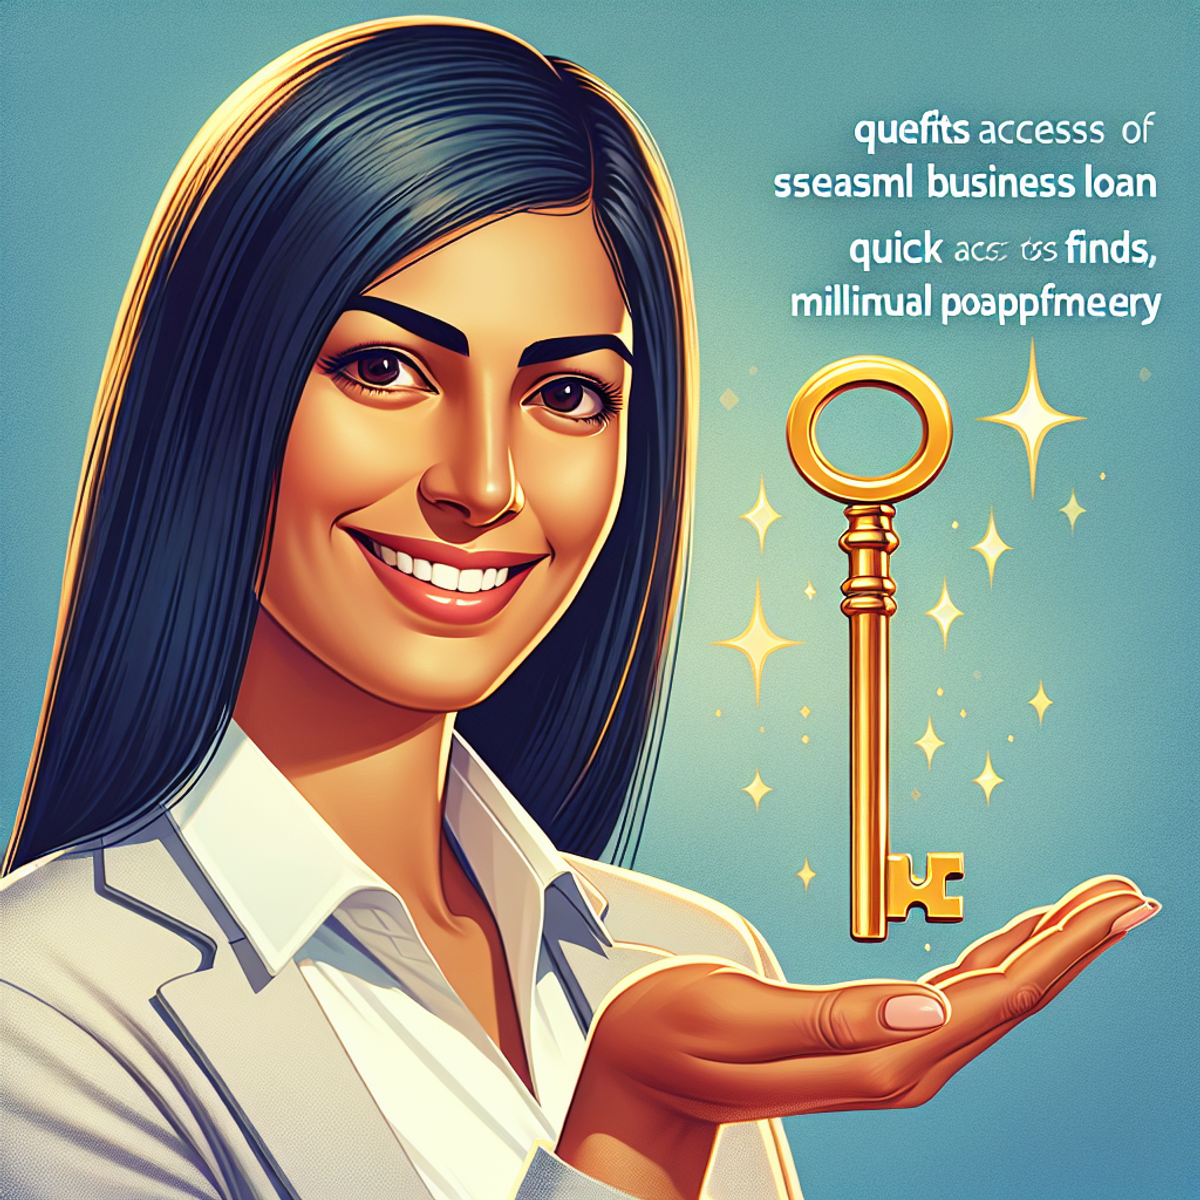 A South Asian woman smiling and holding a golden key, representing empowerment and success for MSME owners.